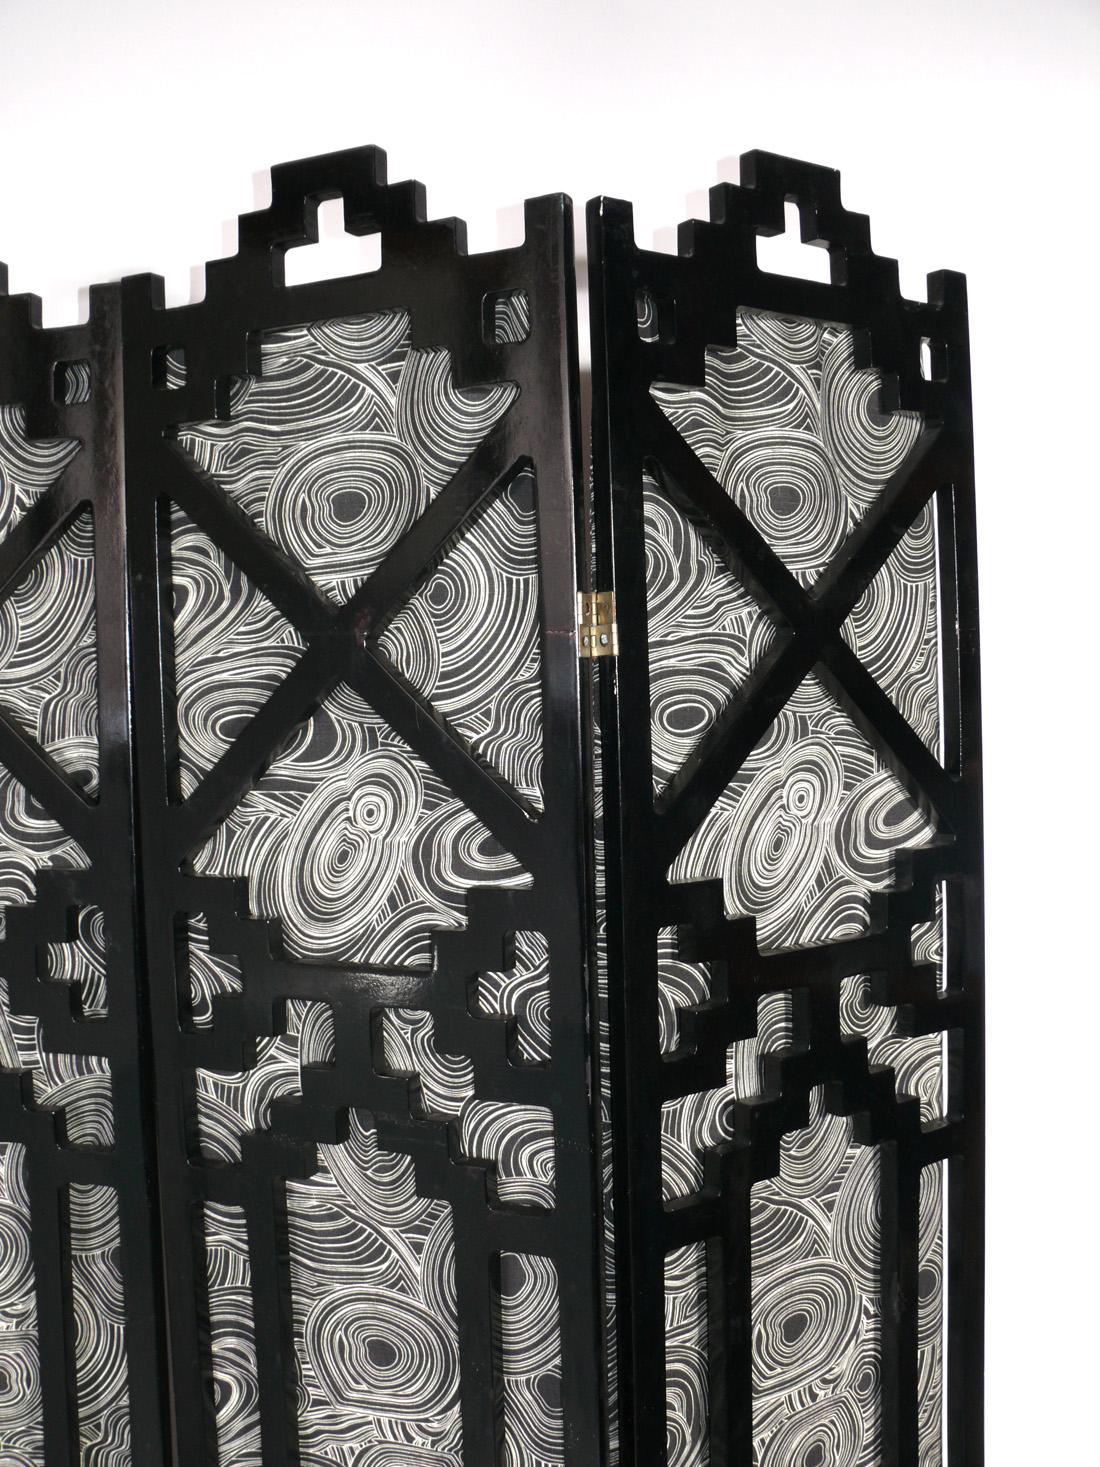 Chinoiserie Asian Black Lacquer Folding Screen or Room Divider For Sale